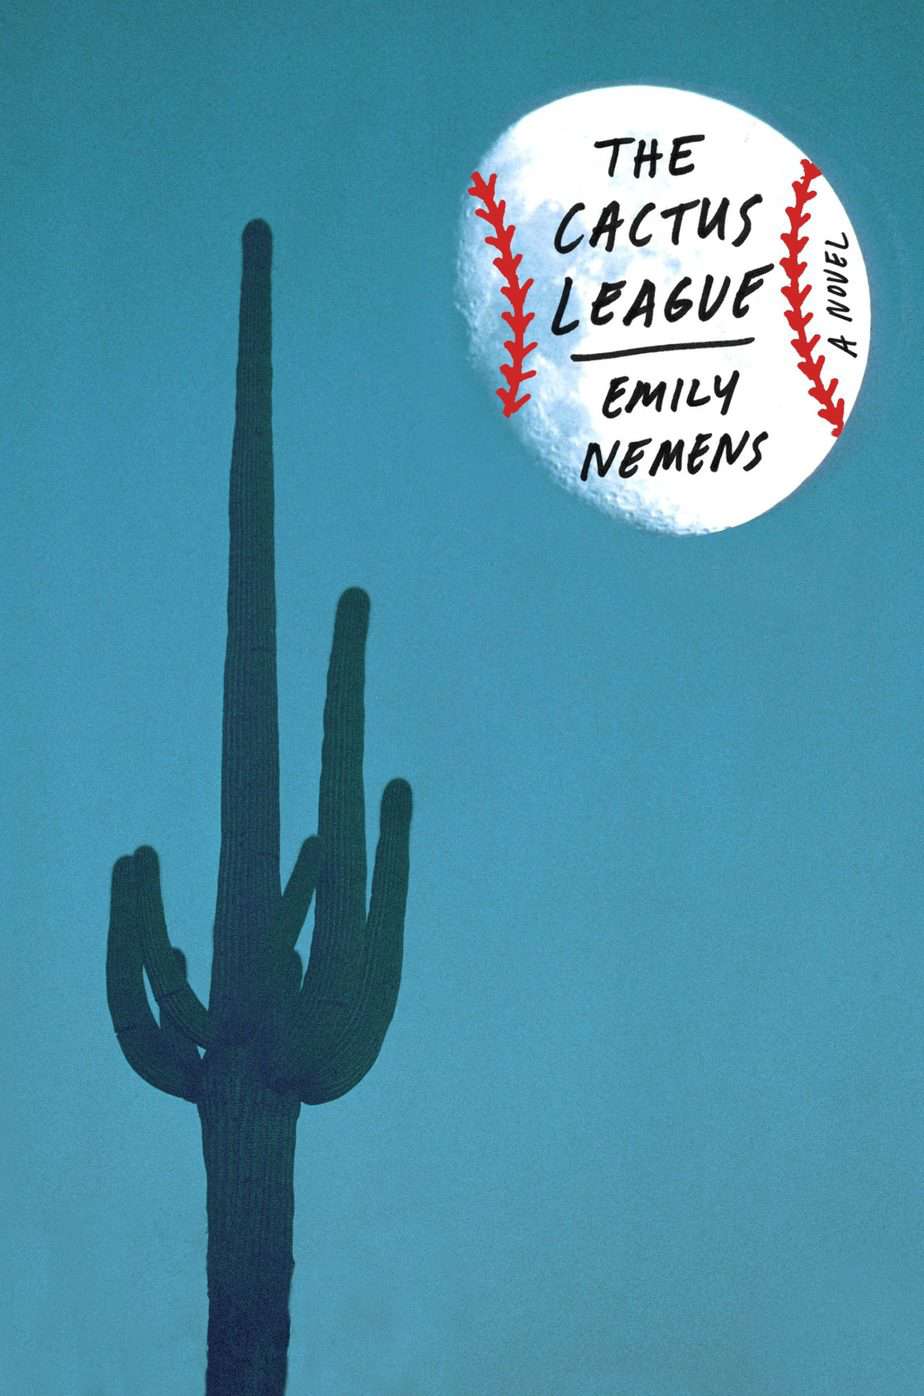 Cover of book The Cactus League by Emily Nemens with baseball as moon